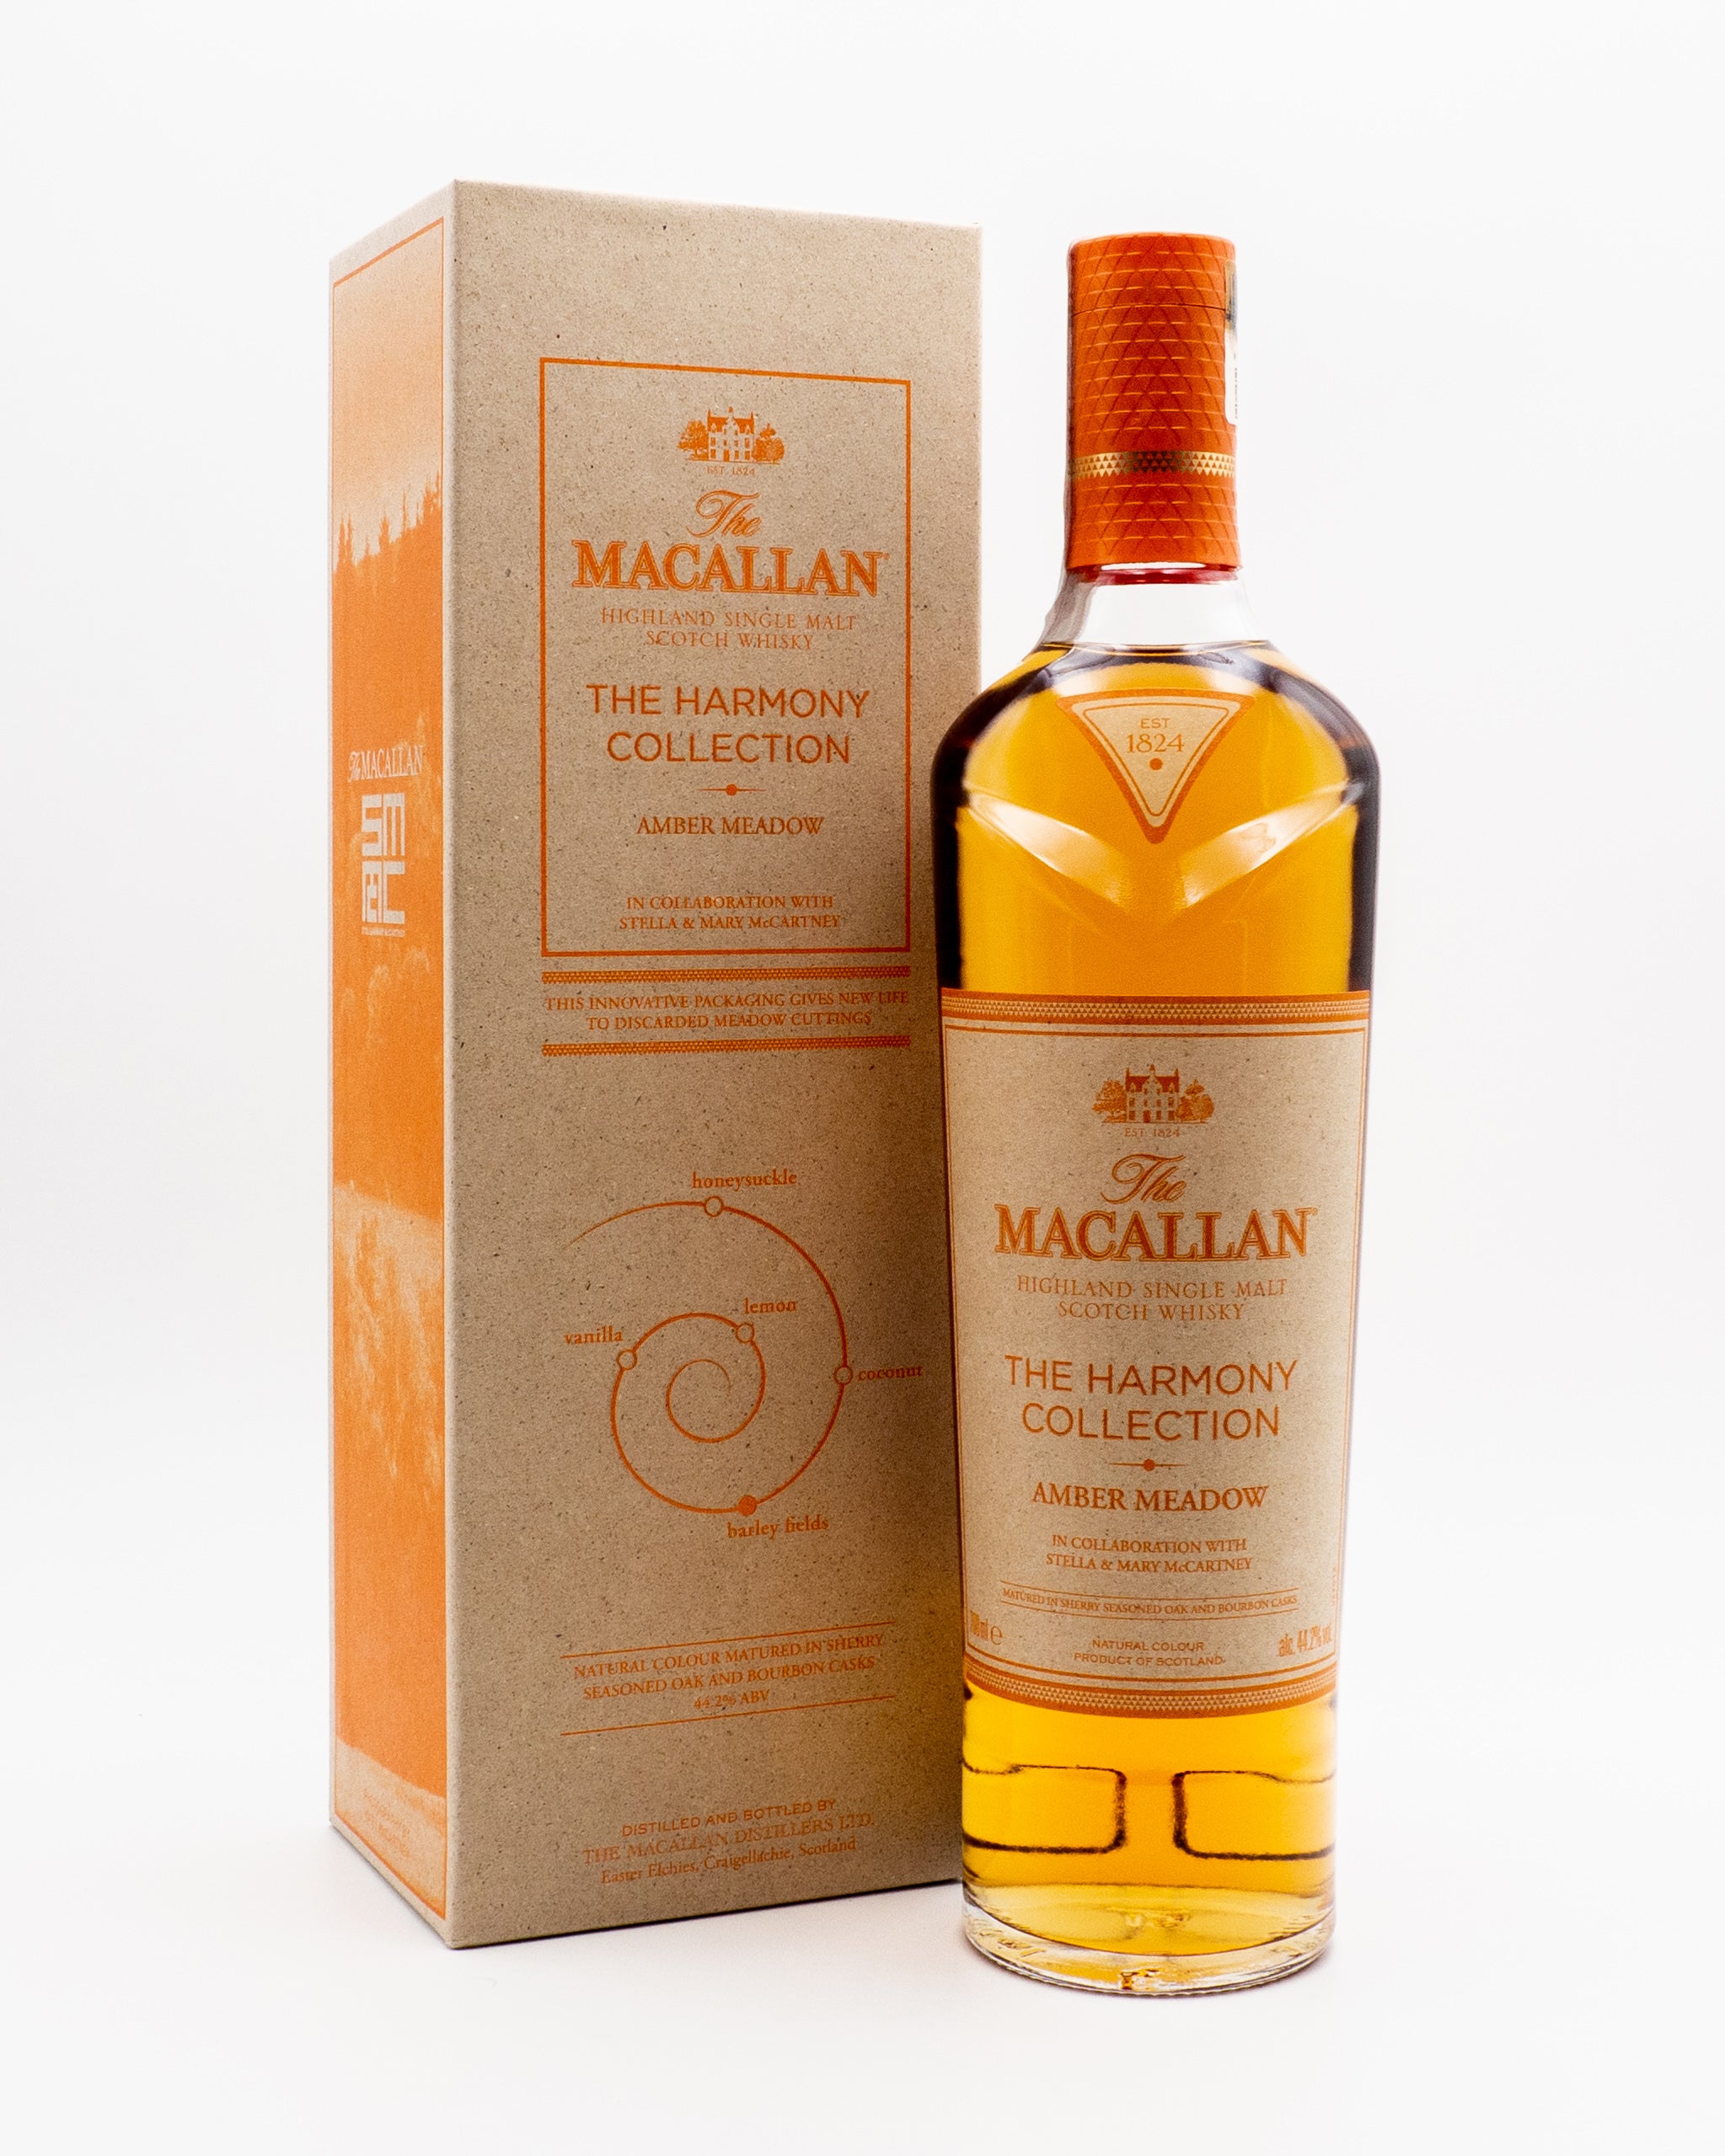 Macallan Harmony Collection Amber Meadow - The Macallan